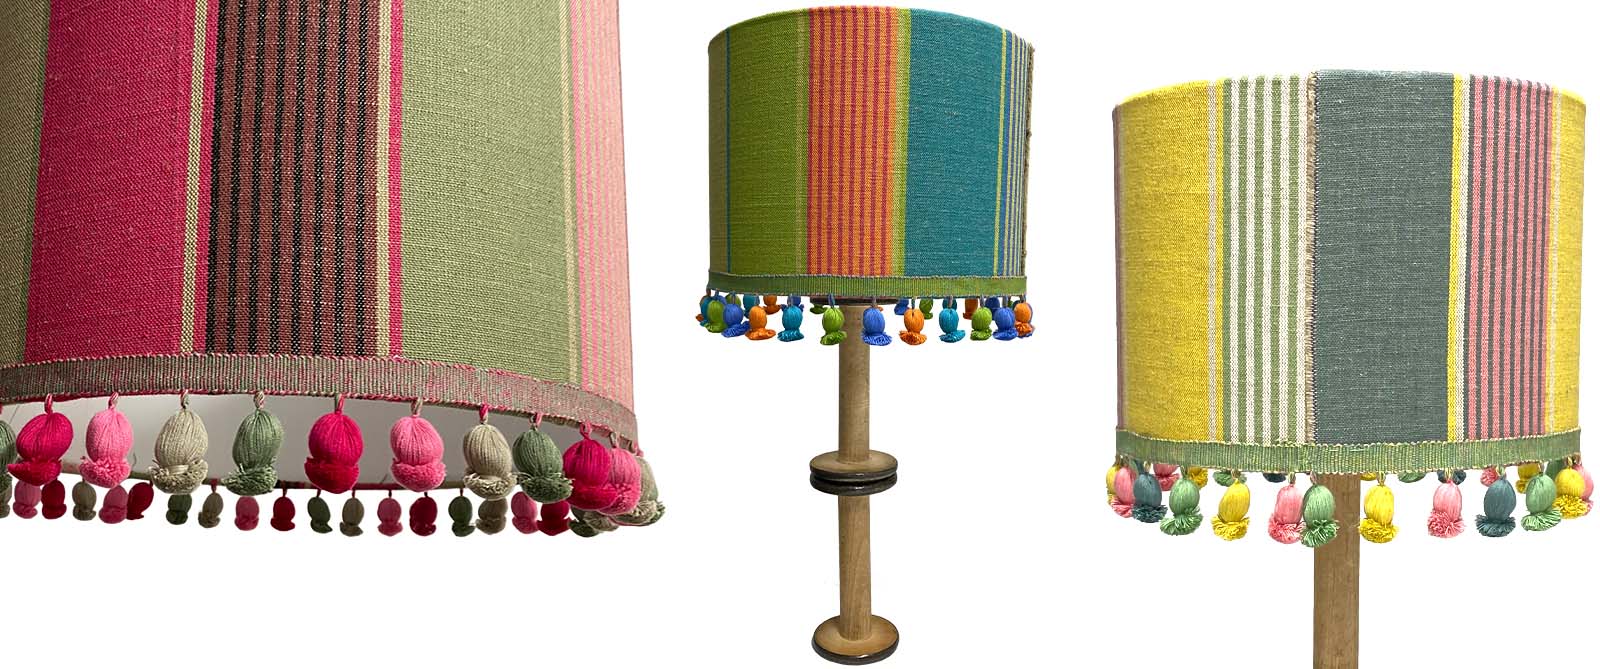 Blue, Sand, Turquoise Striped Drum Lampshades